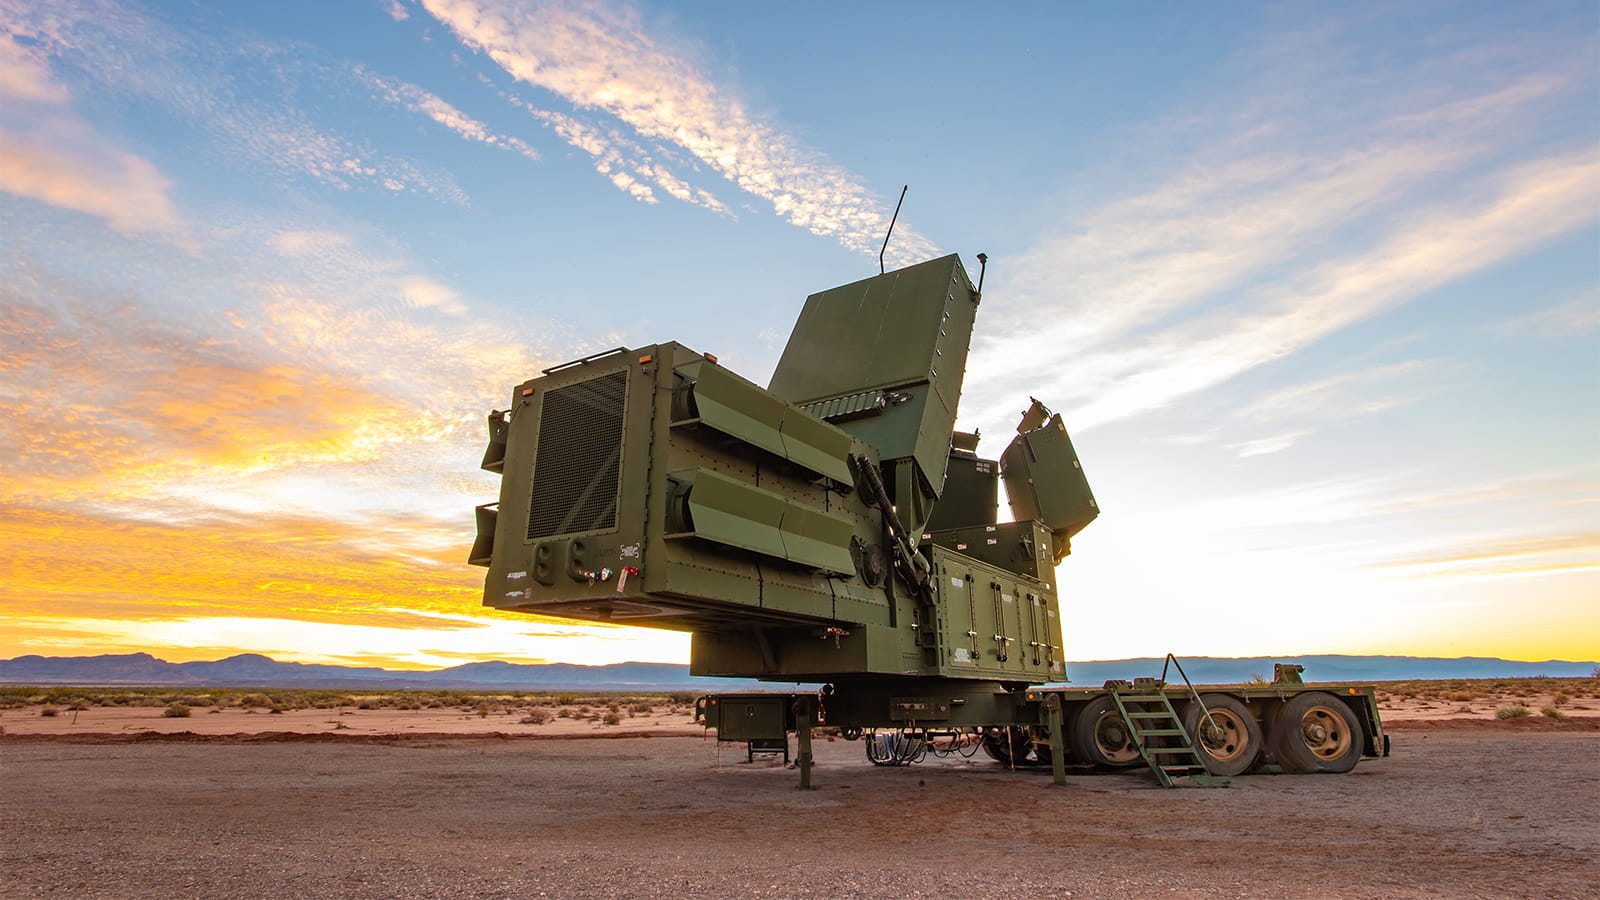 Raytheon’s LTAMDS completed its latest round of live fire testing, effectively demonstrating the radar’s performance and integration with the Integrated Battle Command System, or IBCS.